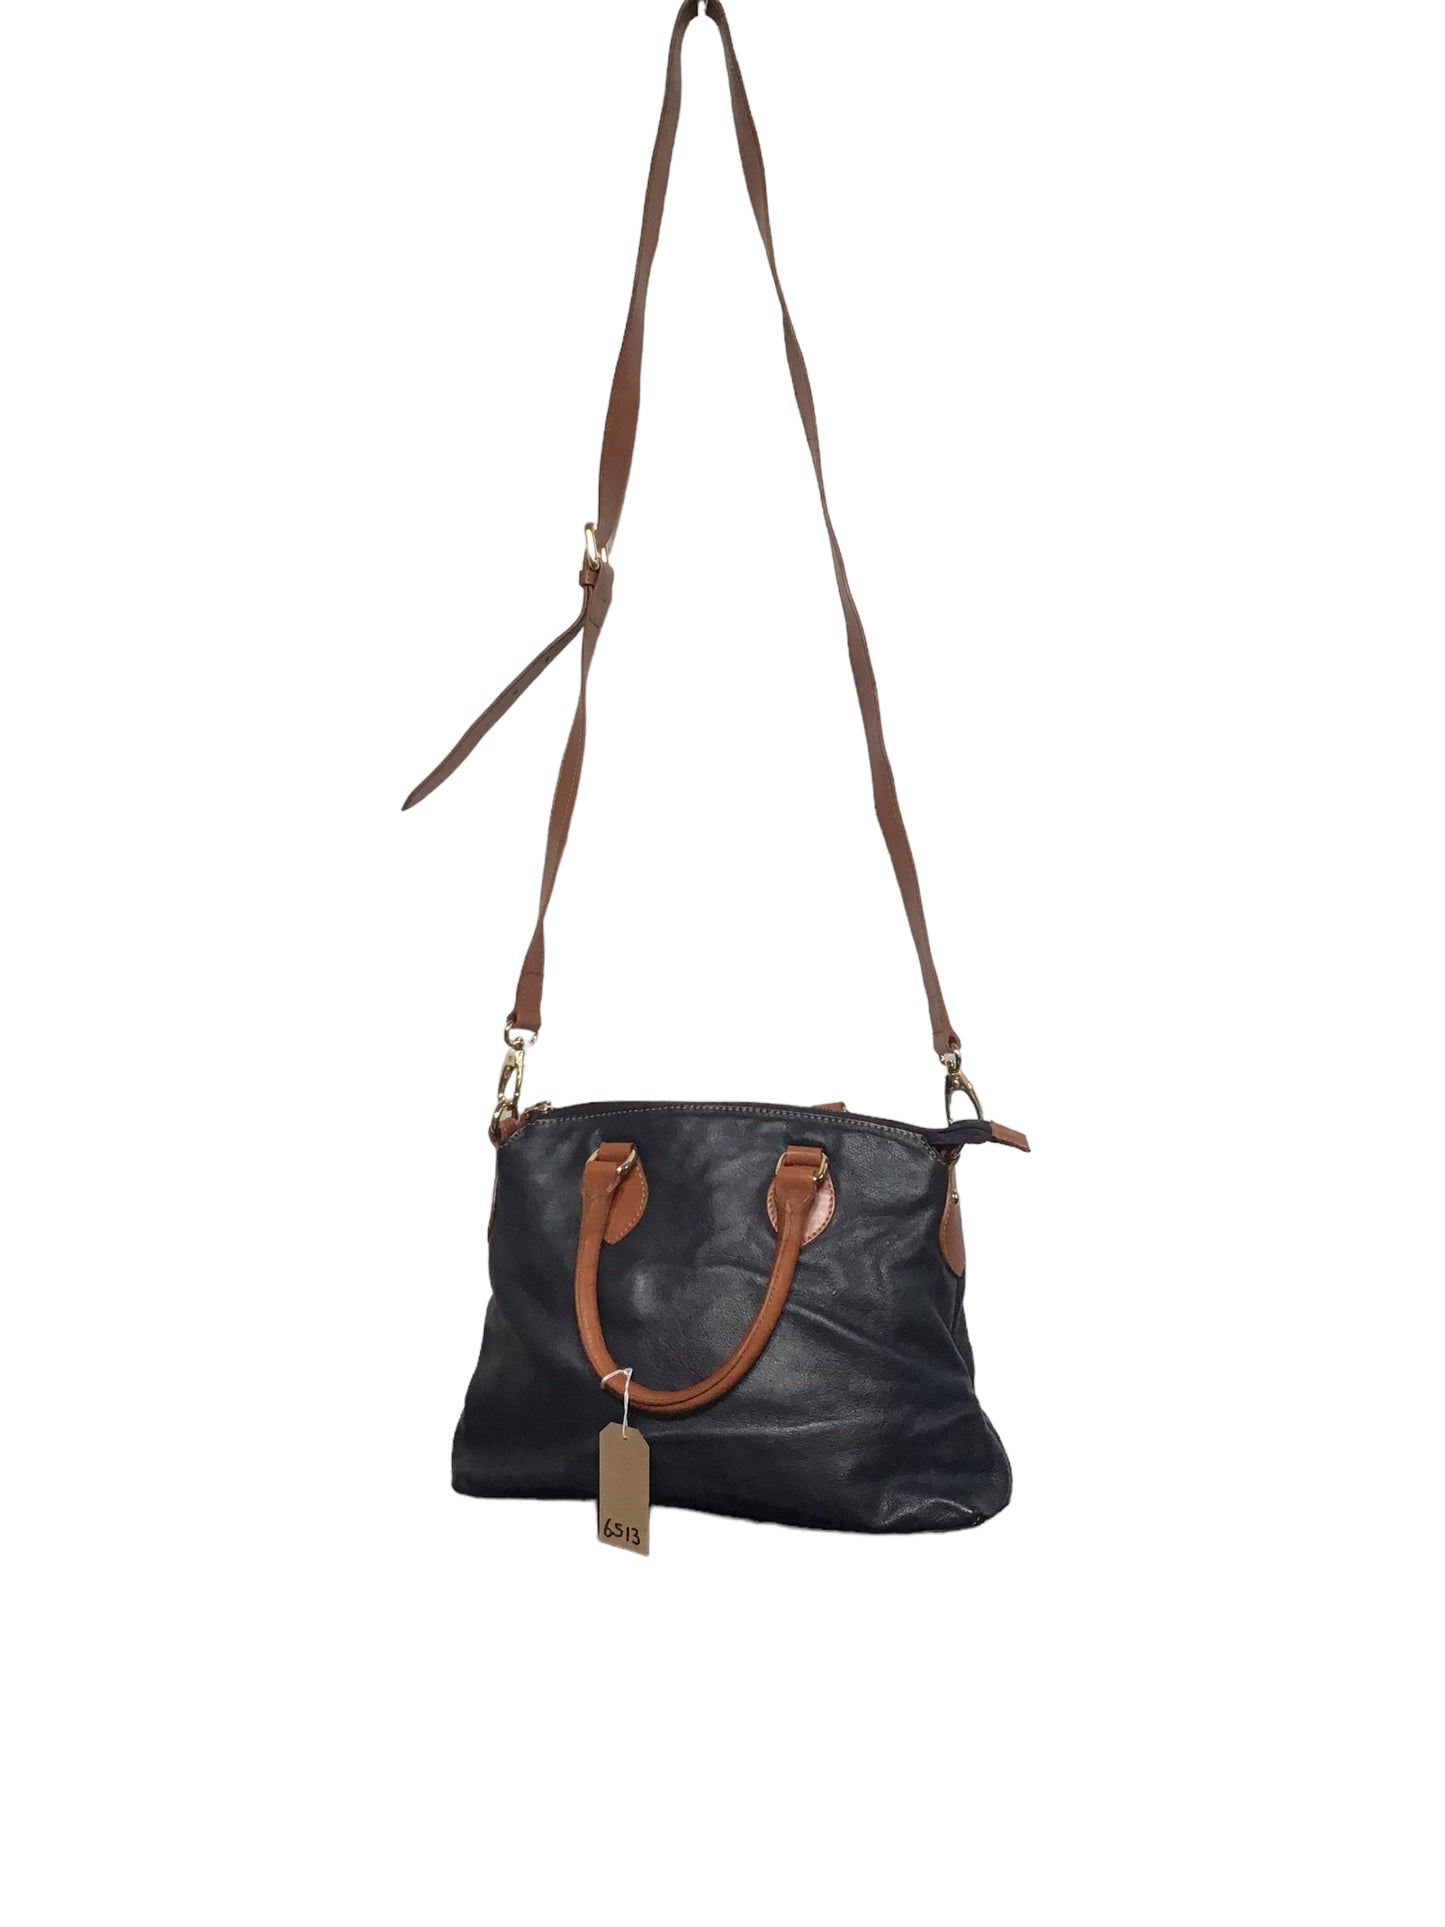 Navy and Brown Cross Body Bag (W13xH10)